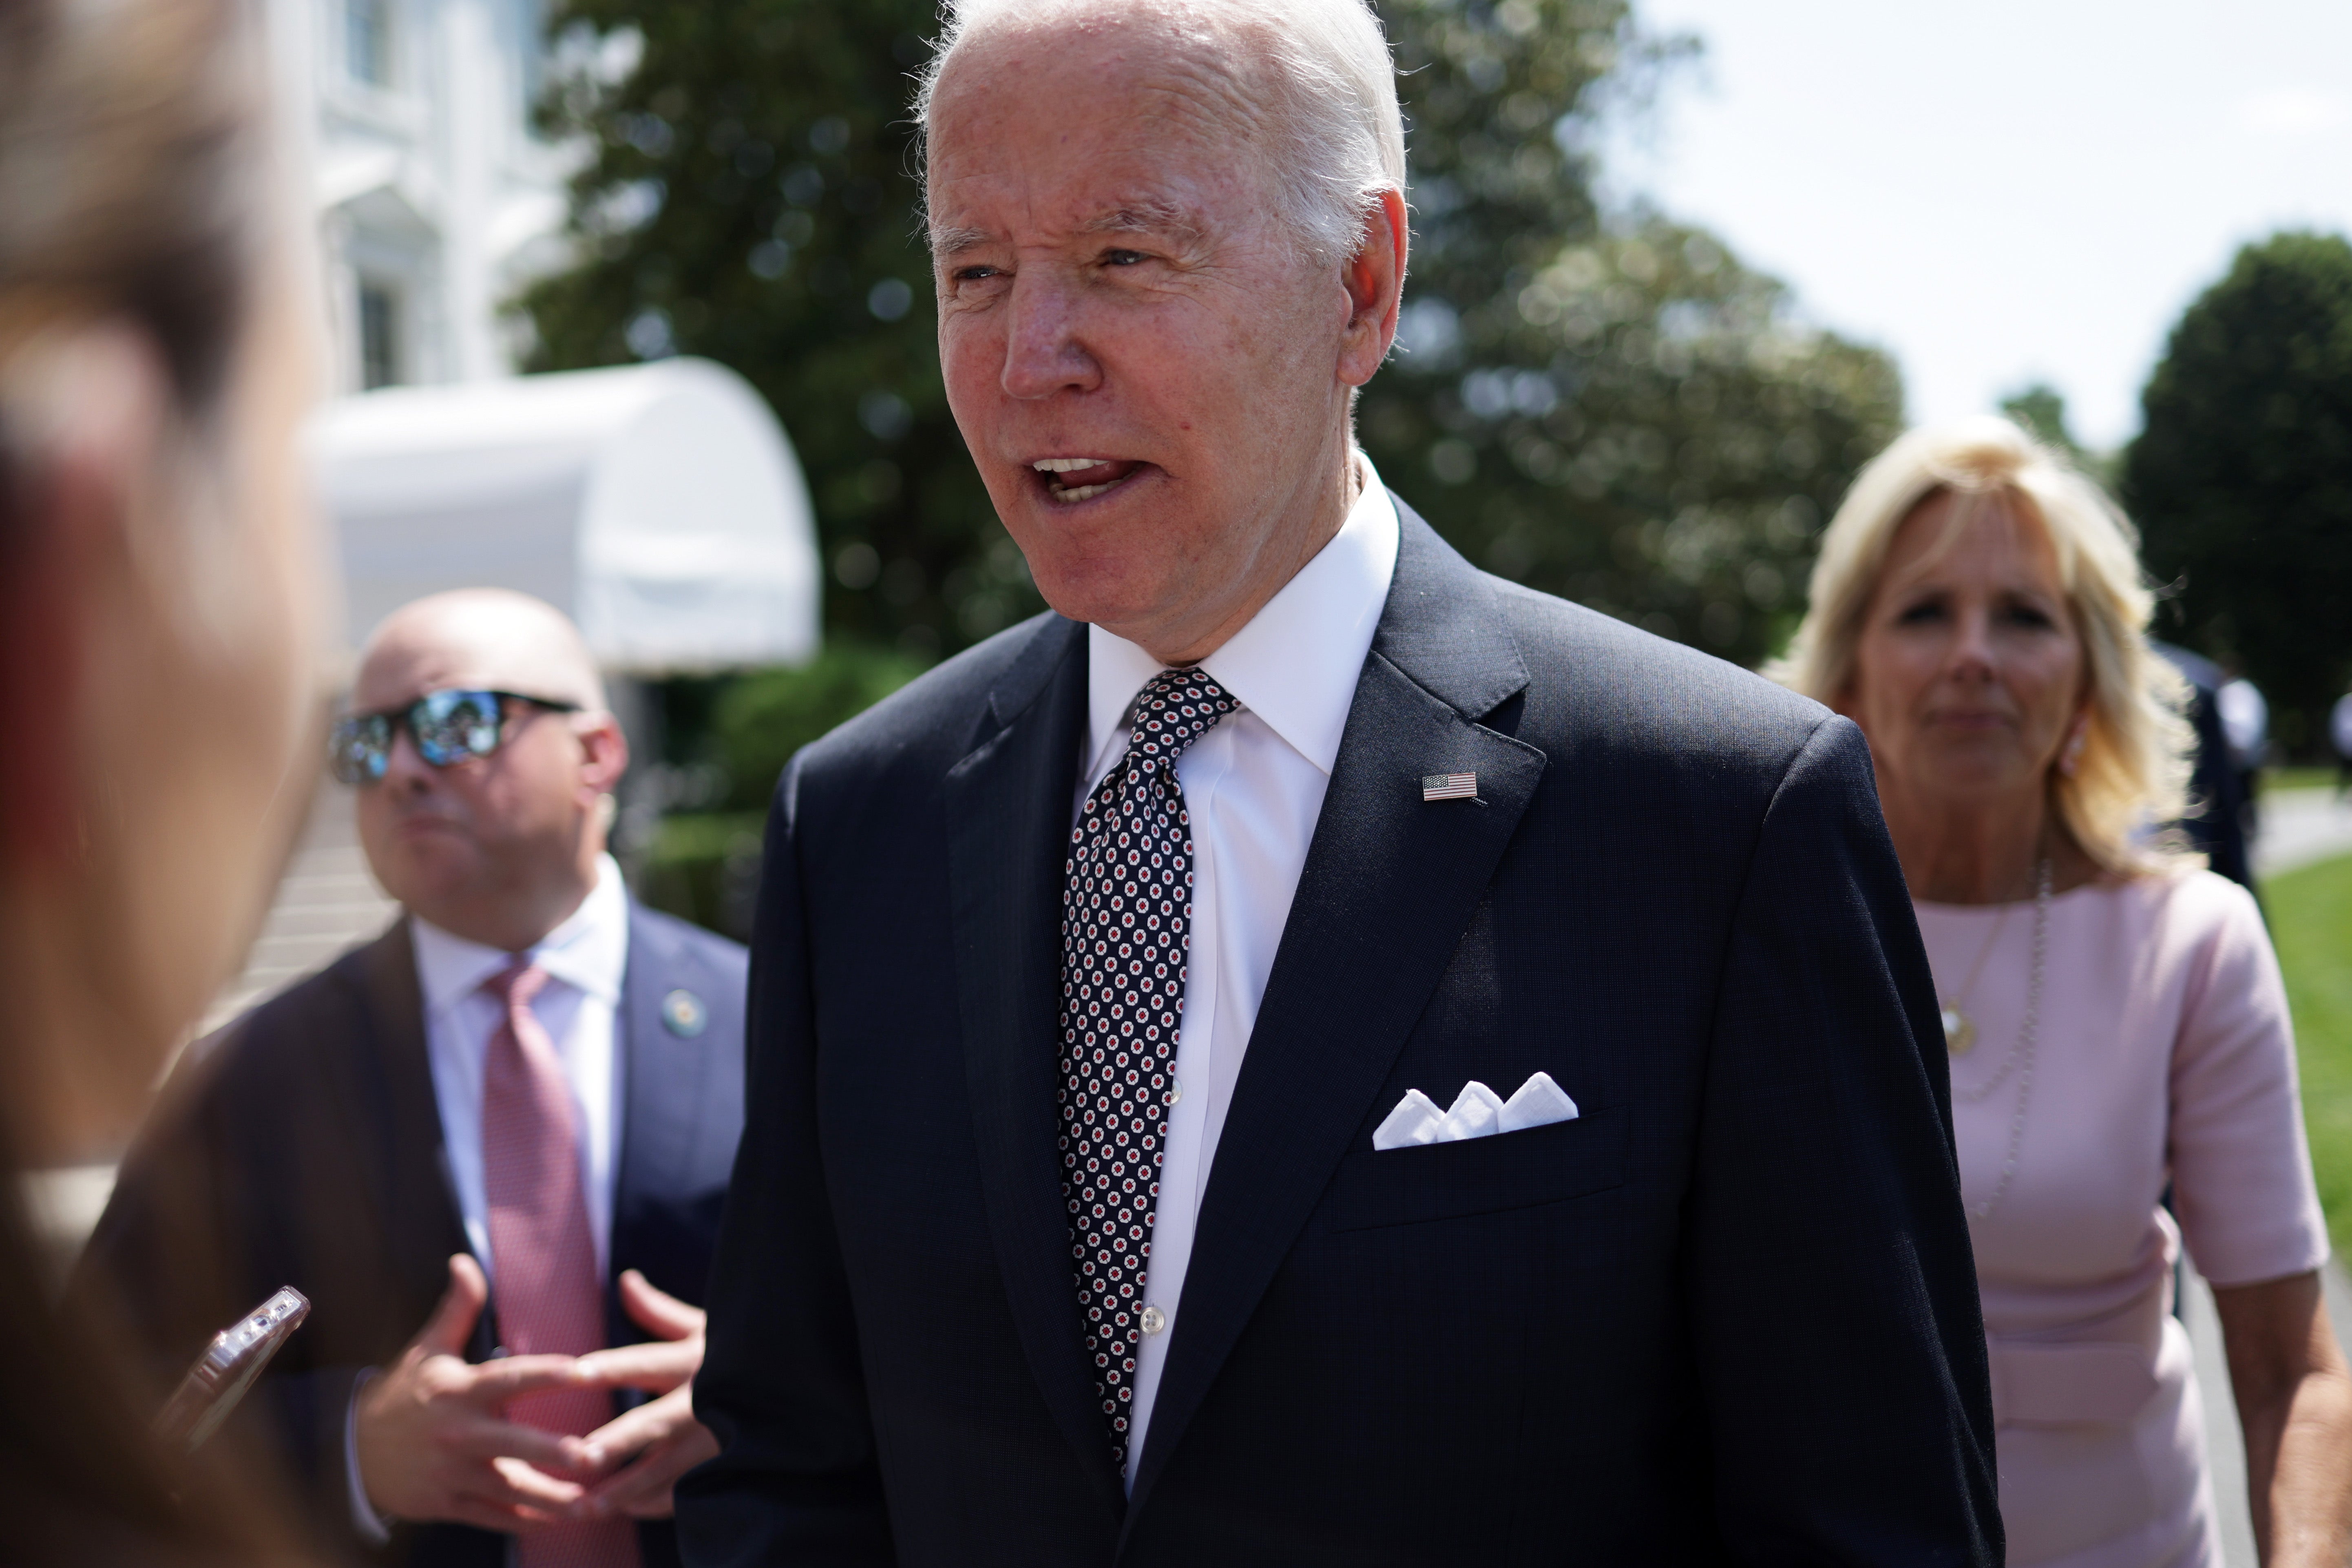 Biden likes to duke it out with the press when he gets a tough question — here are 3 epic examples